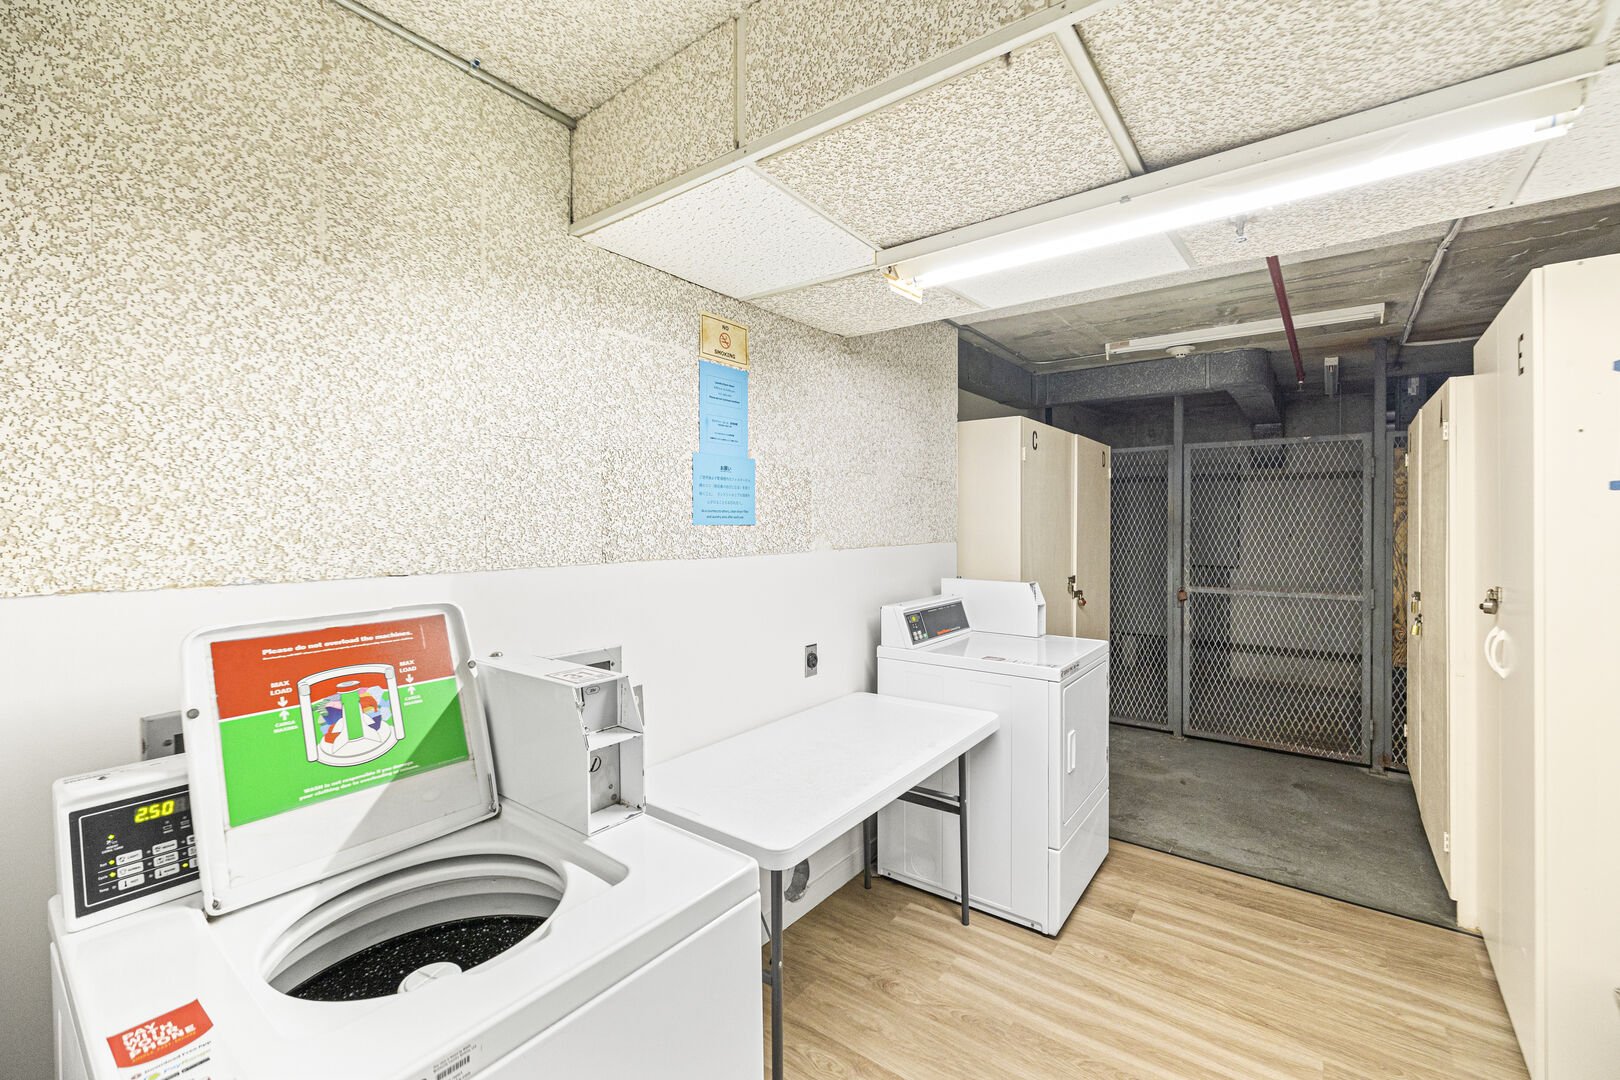 Laundry rooms on each floor with coin-operated washers and dryers